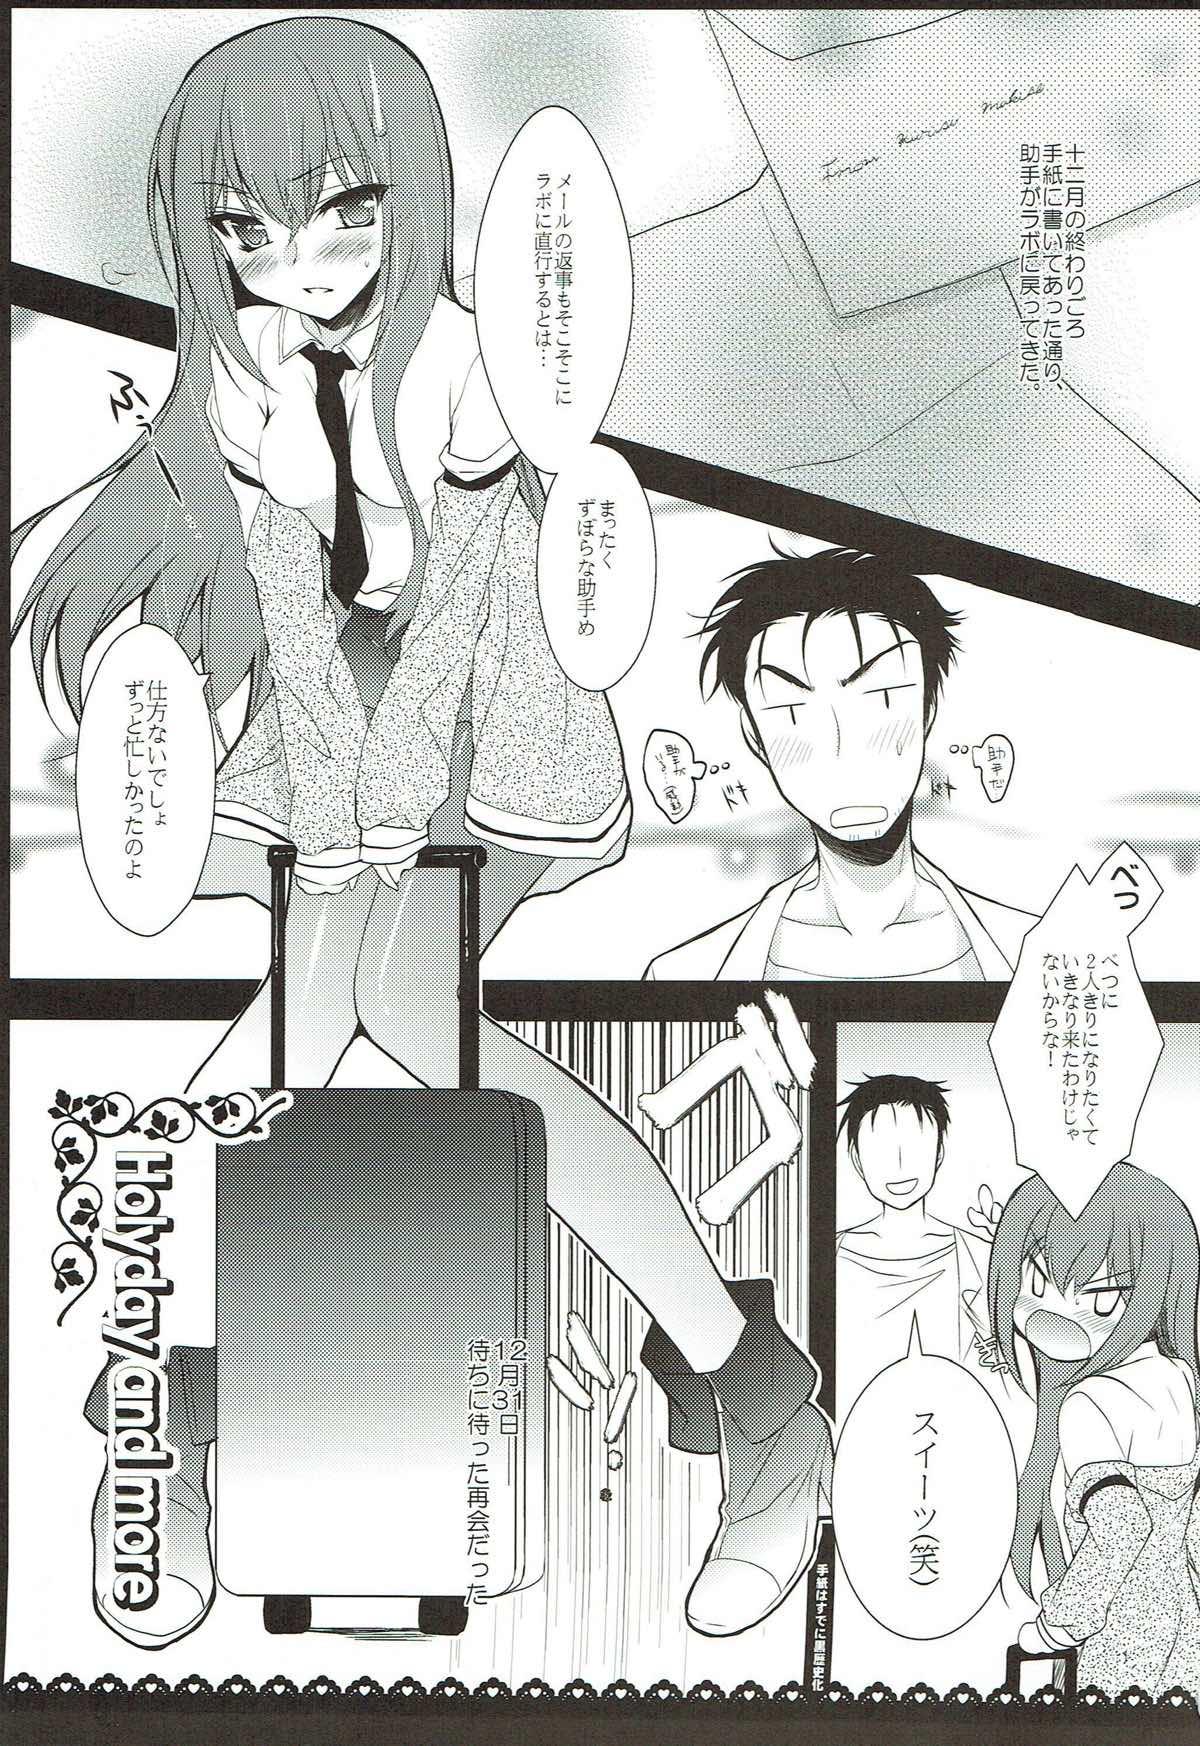 Spycam Holyday and more - Steinsgate Brazil - Page 2